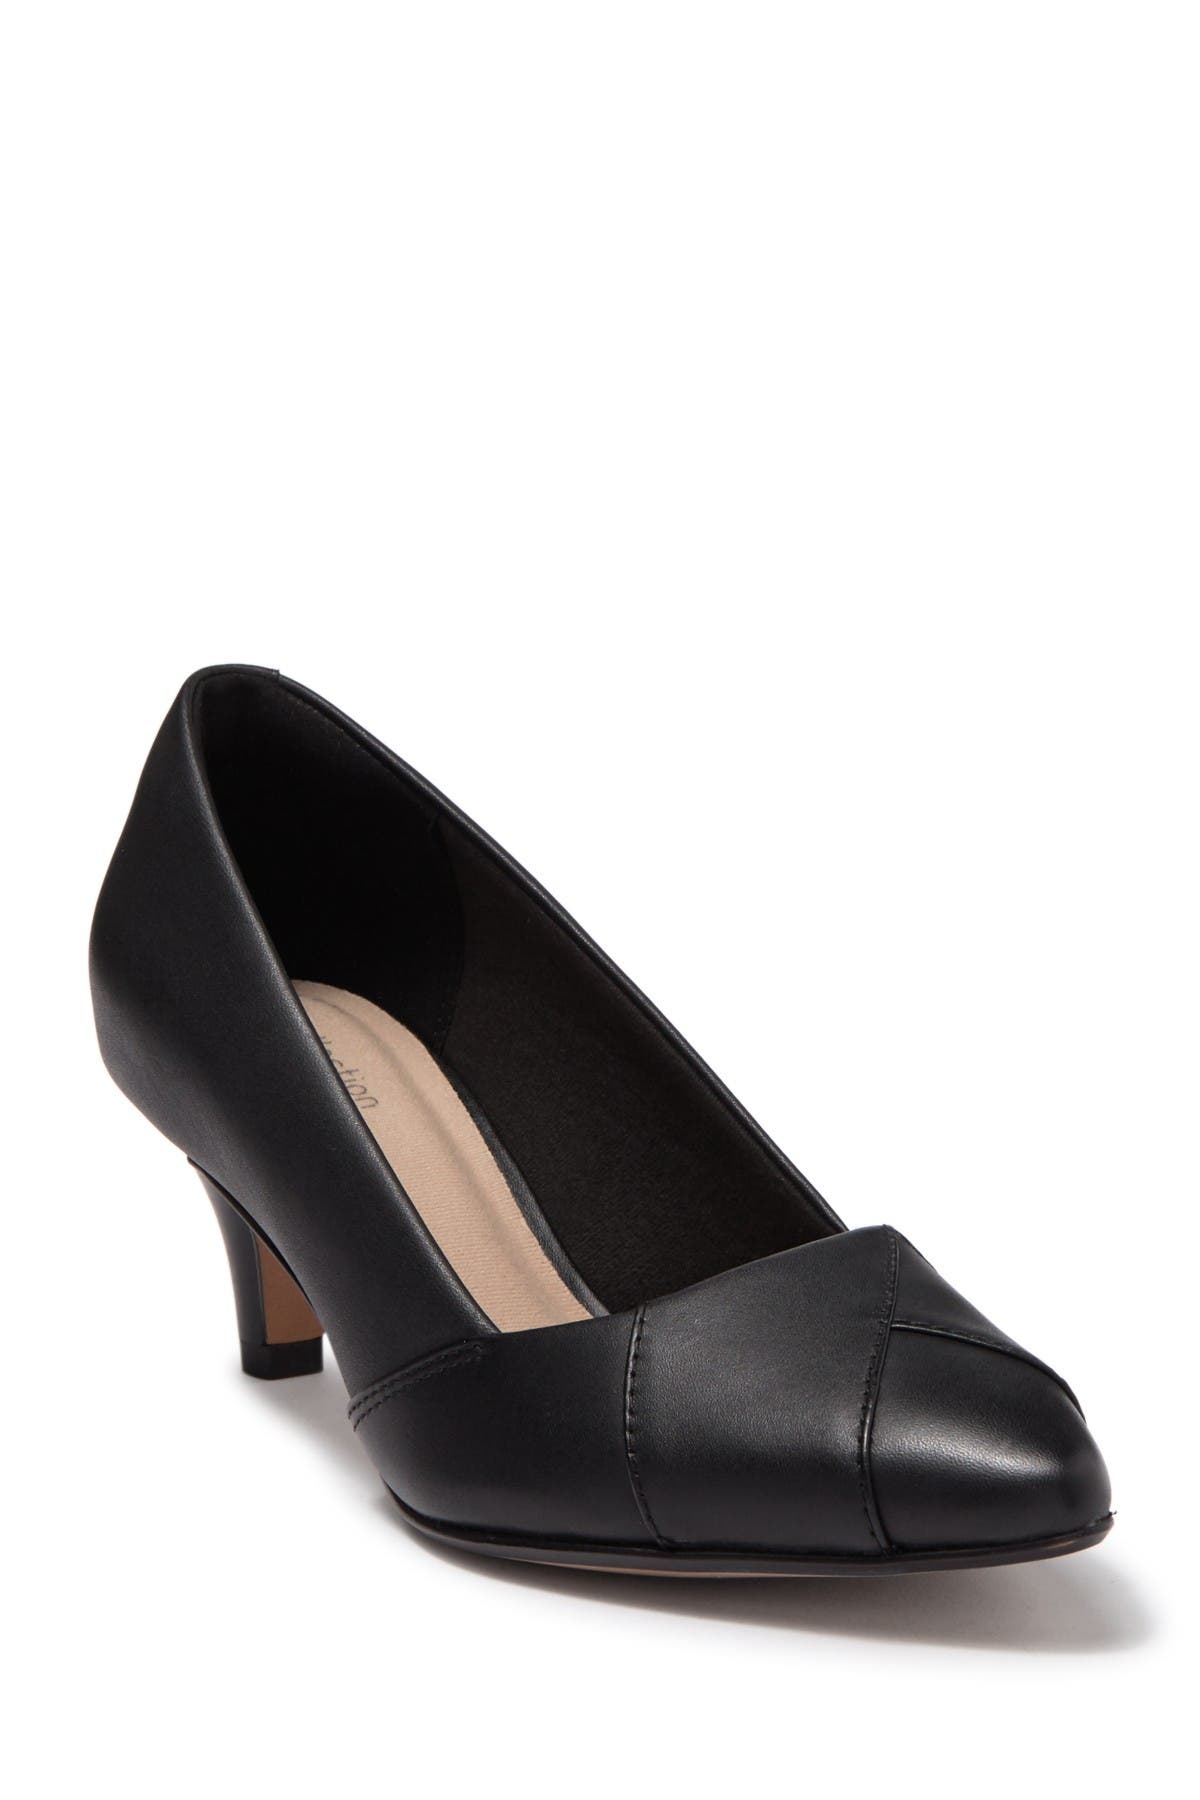 Women's Shoes Clearance | Nordstrom Rack